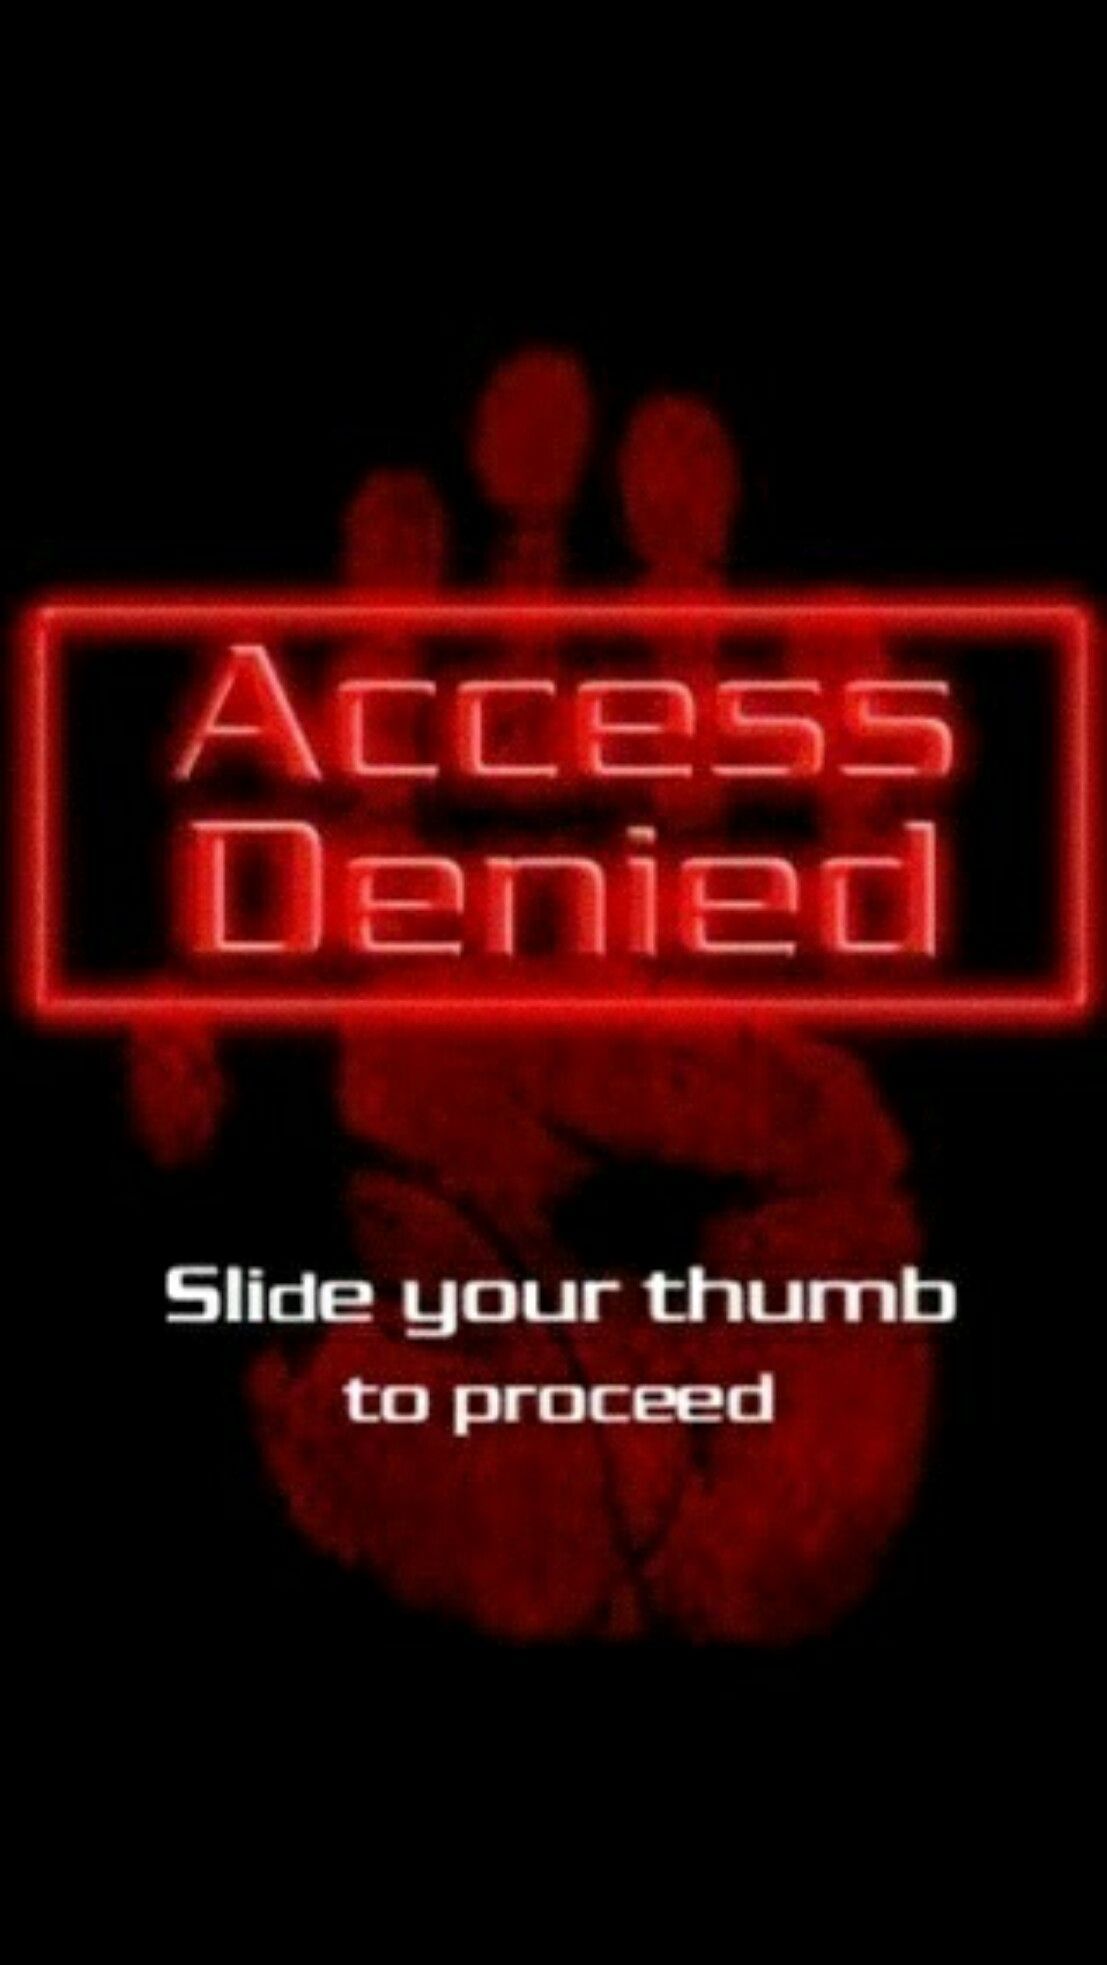 Access is denied 15 steam фото 104